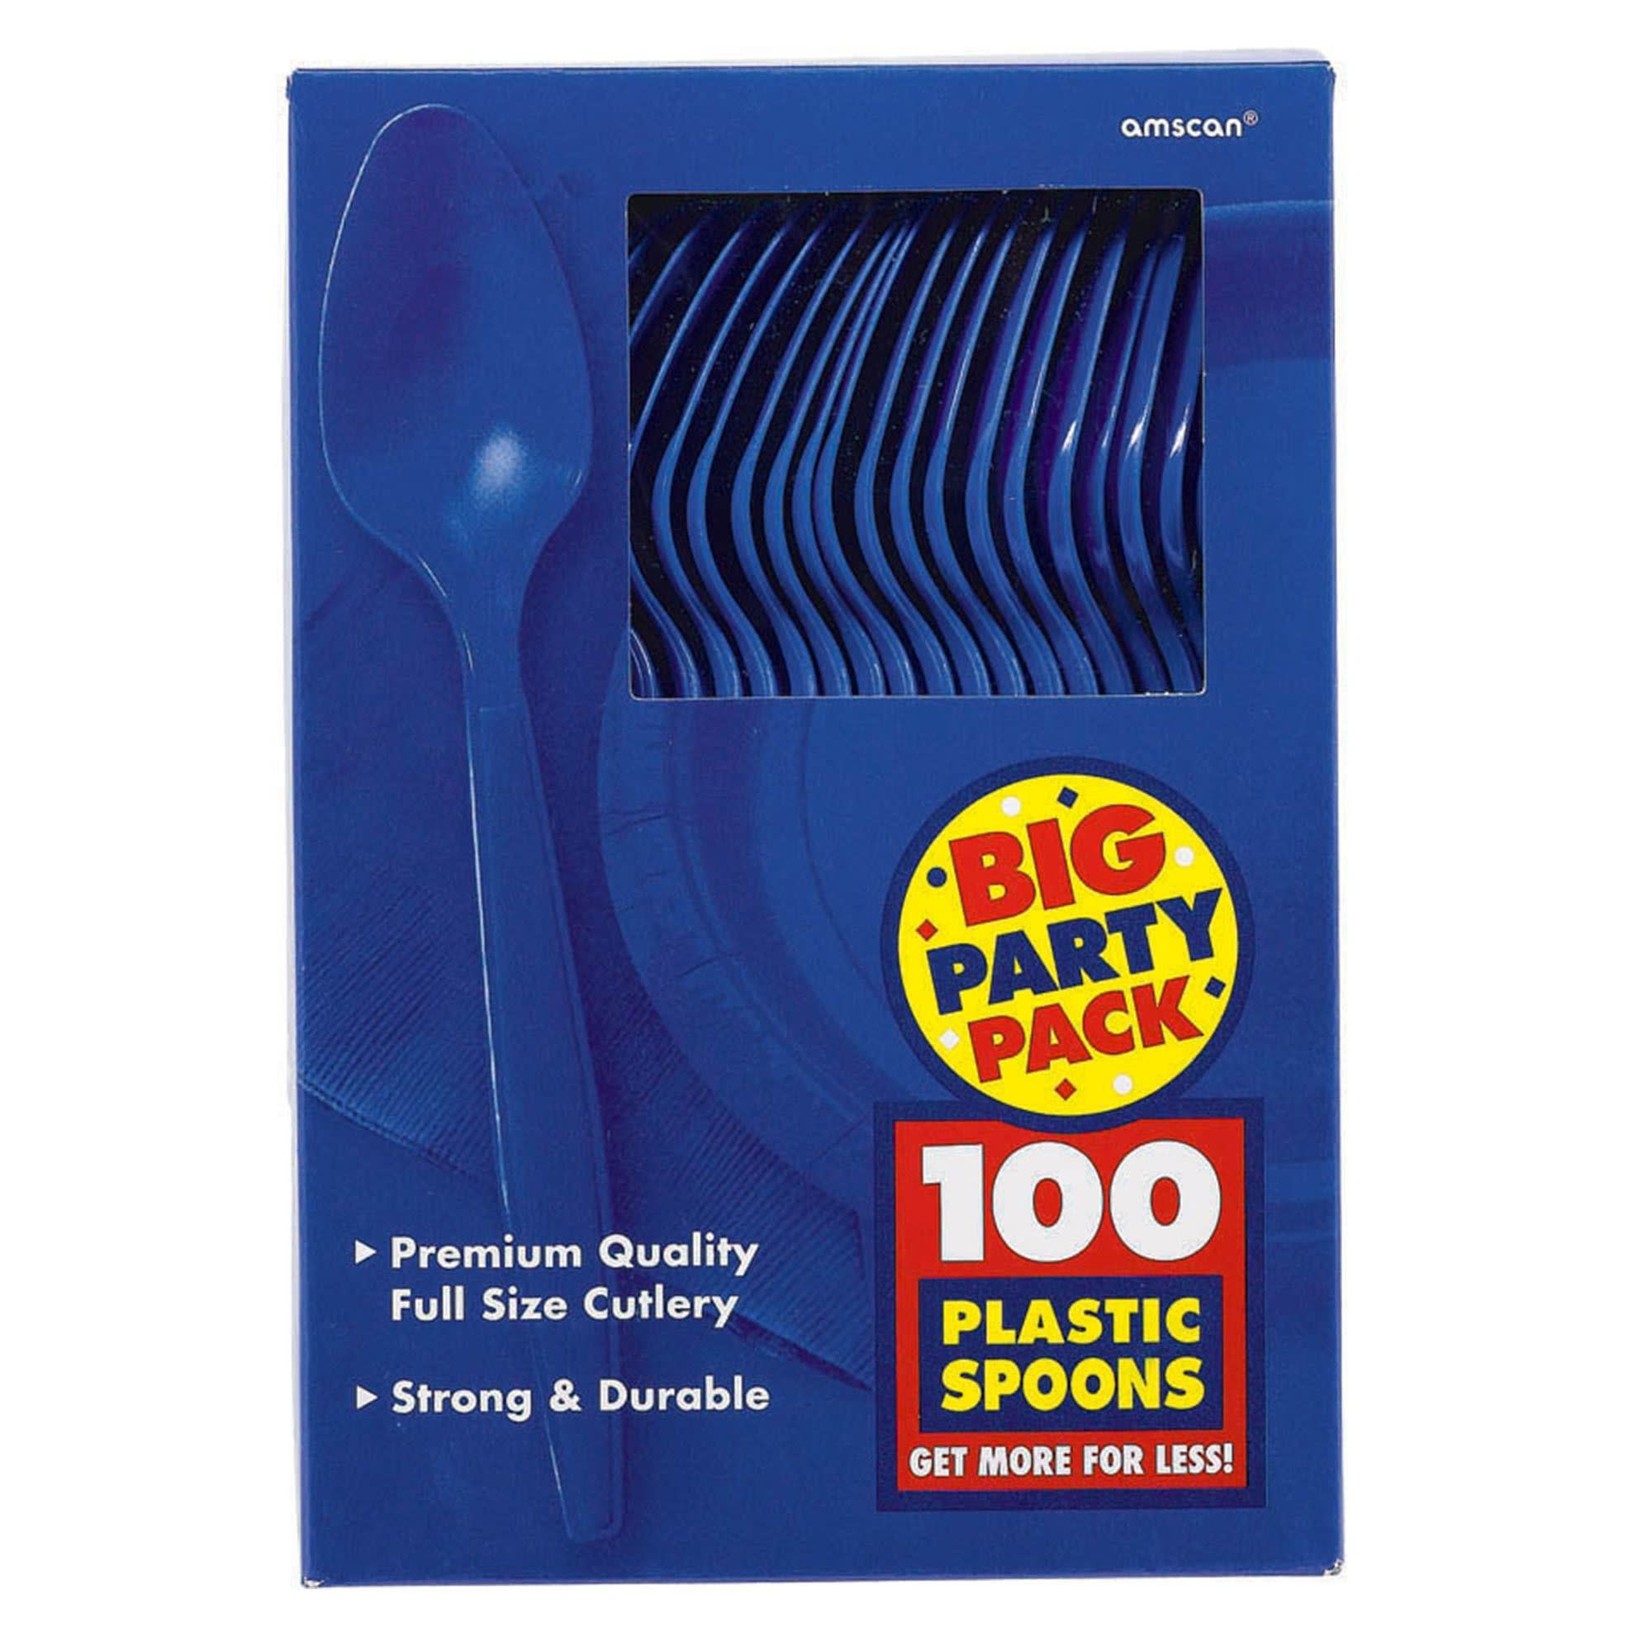 Big Party Pack Plastic Spoons - Bright Royal Blue